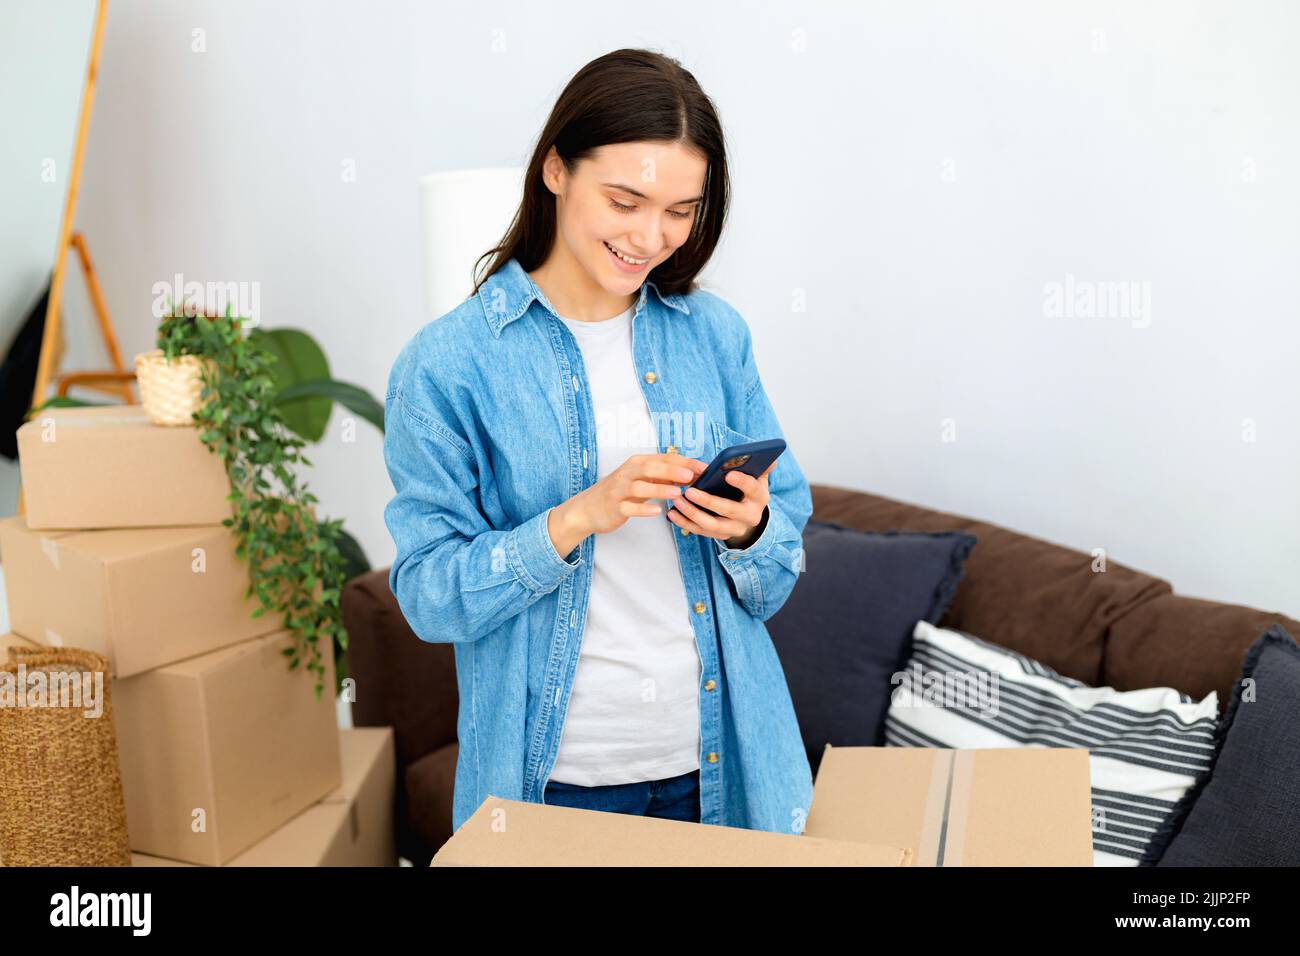 Happy young woman using mobile phone order transportation service and movers to move to new home Stock Photo